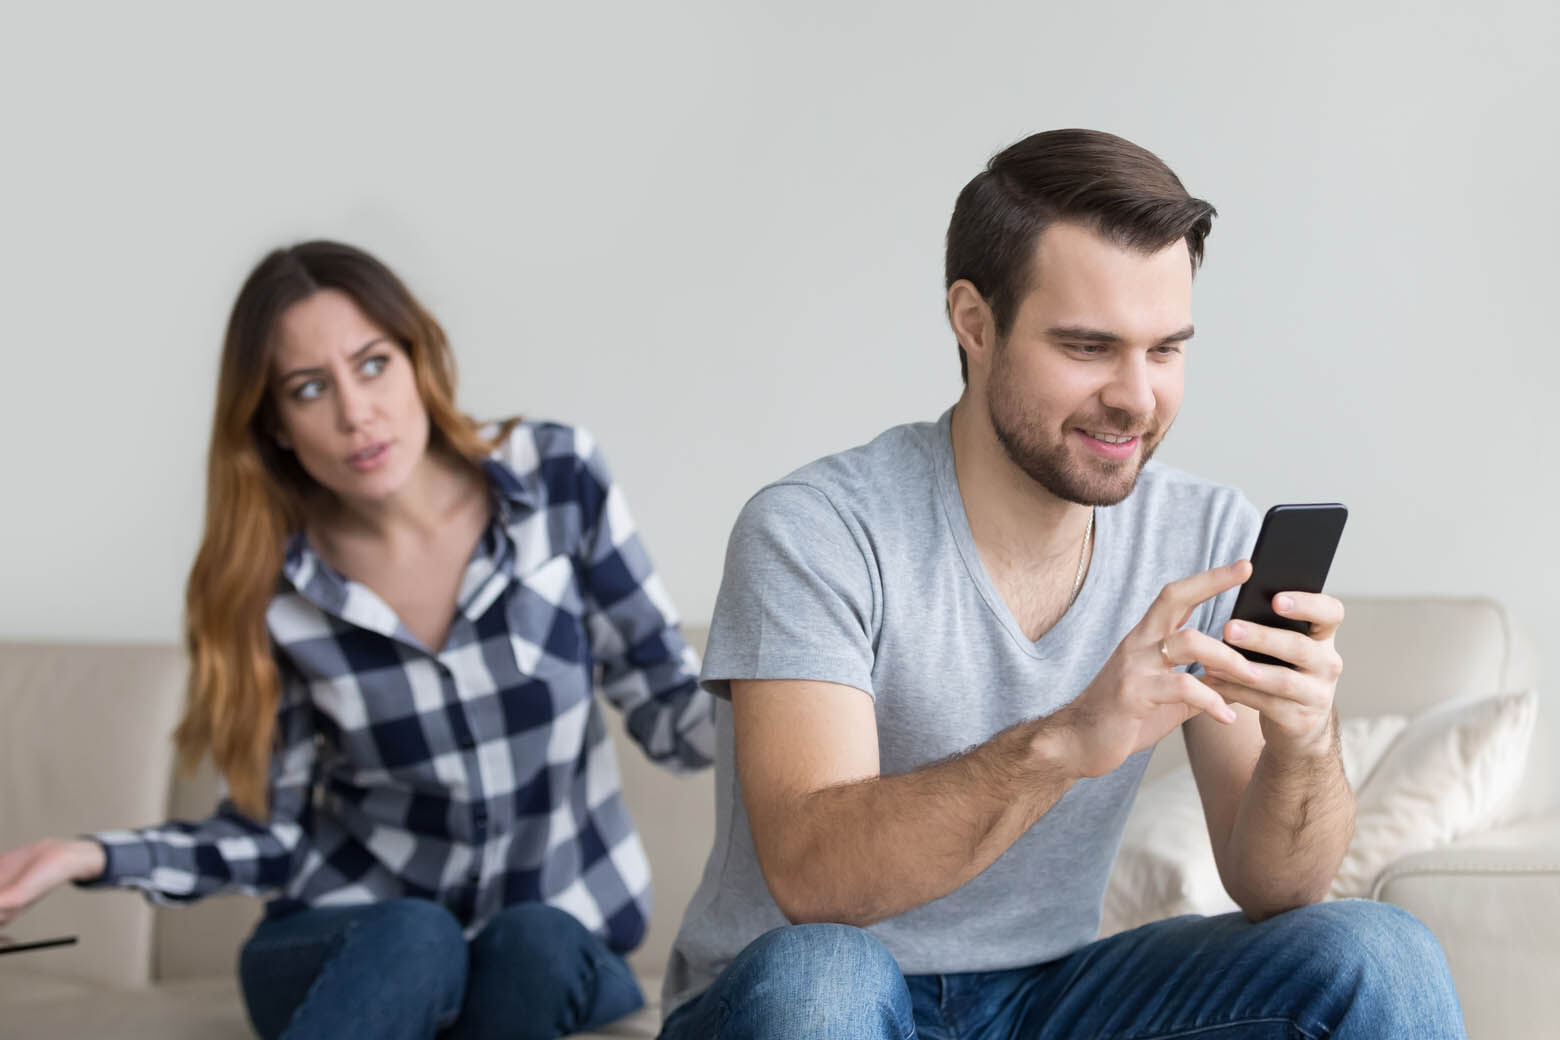 How social media is destroying marriage